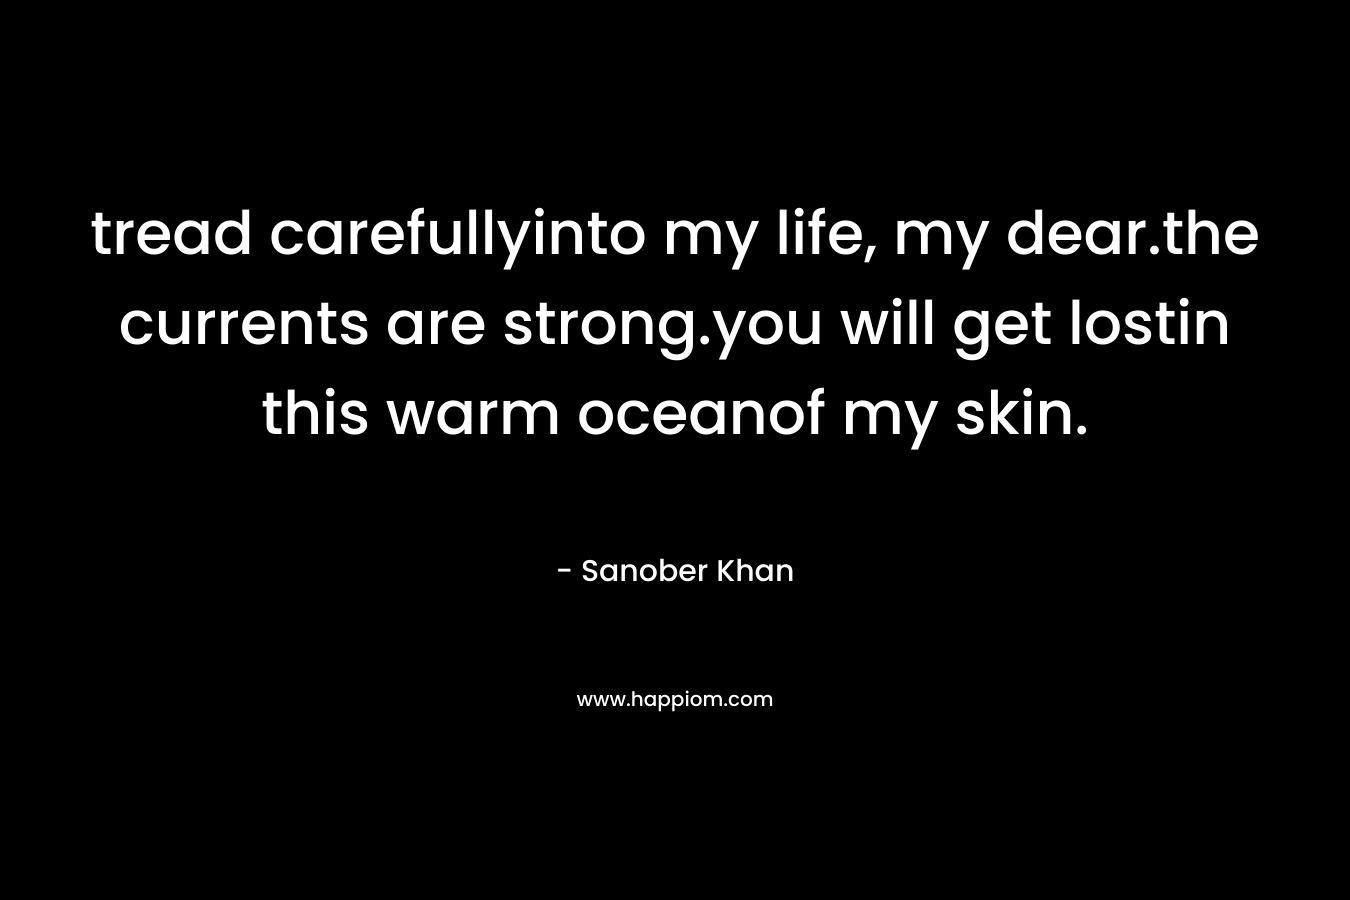 tread carefullyinto my life, my dear.the currents are strong.you will get lostin this warm oceanof my skin. – Sanober  Khan